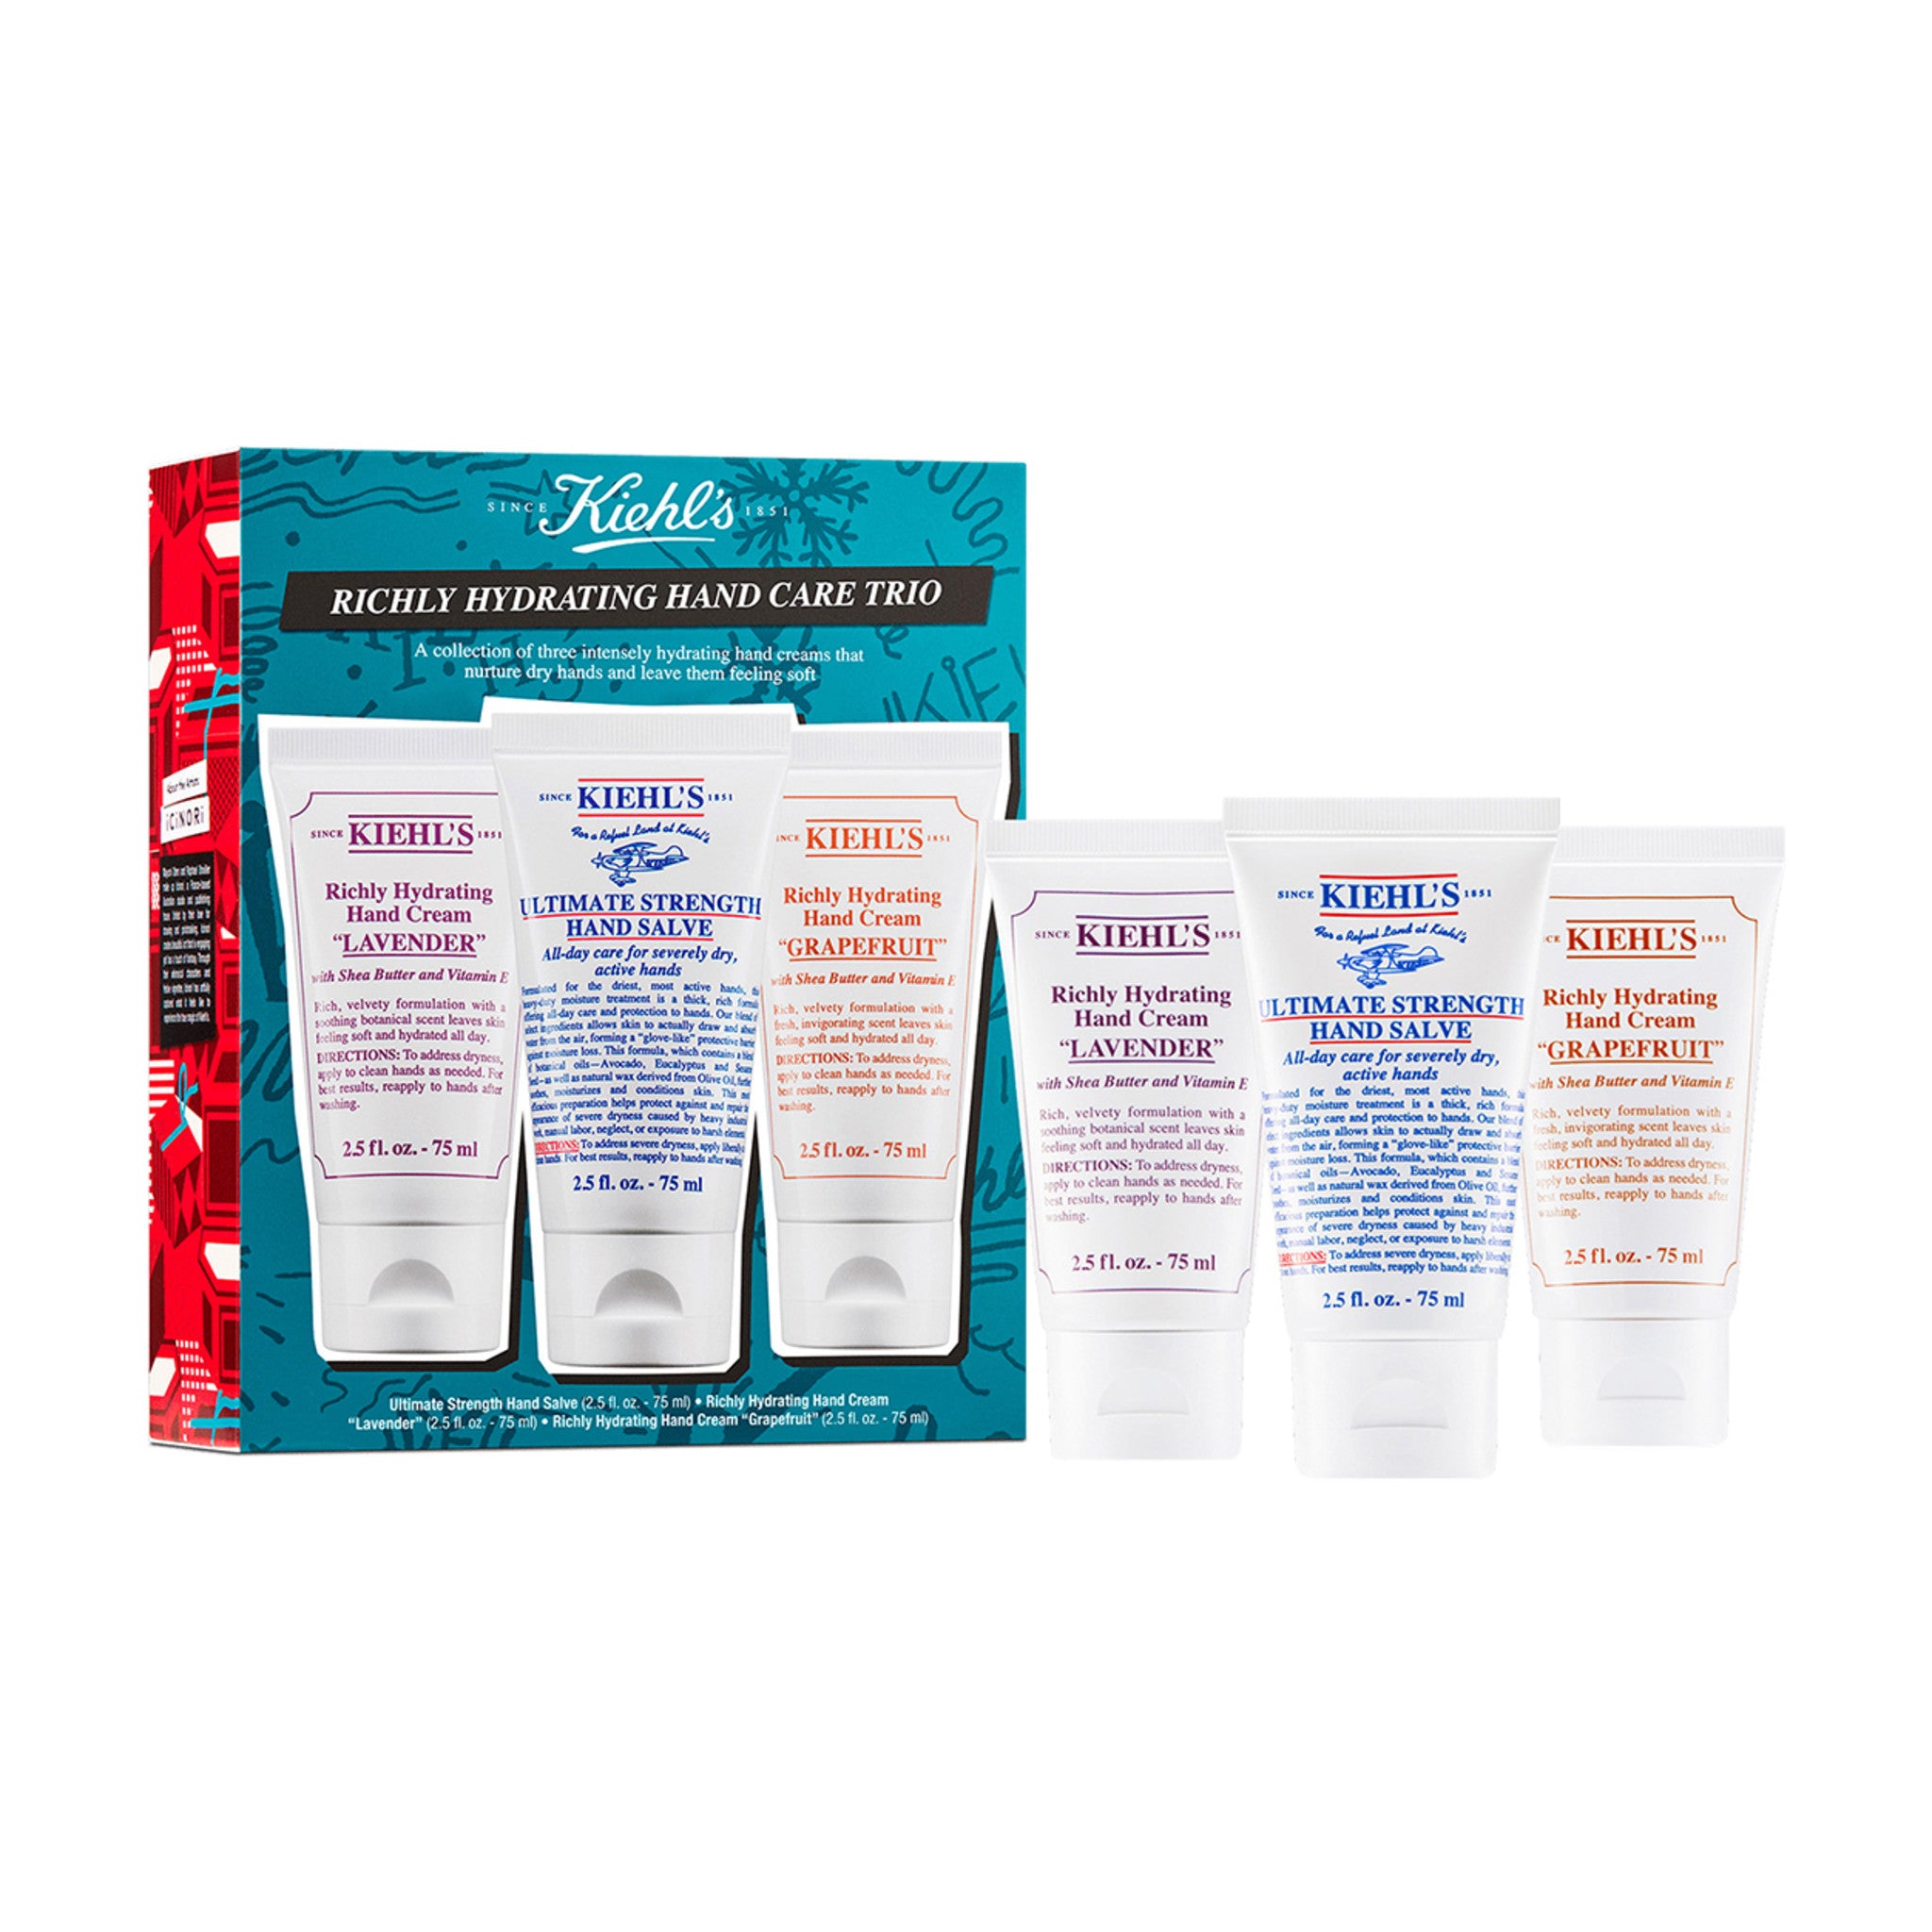 Kiehl's Since 1851 Richly Hydrating Hand Care Trio (Limited Edition) main image.